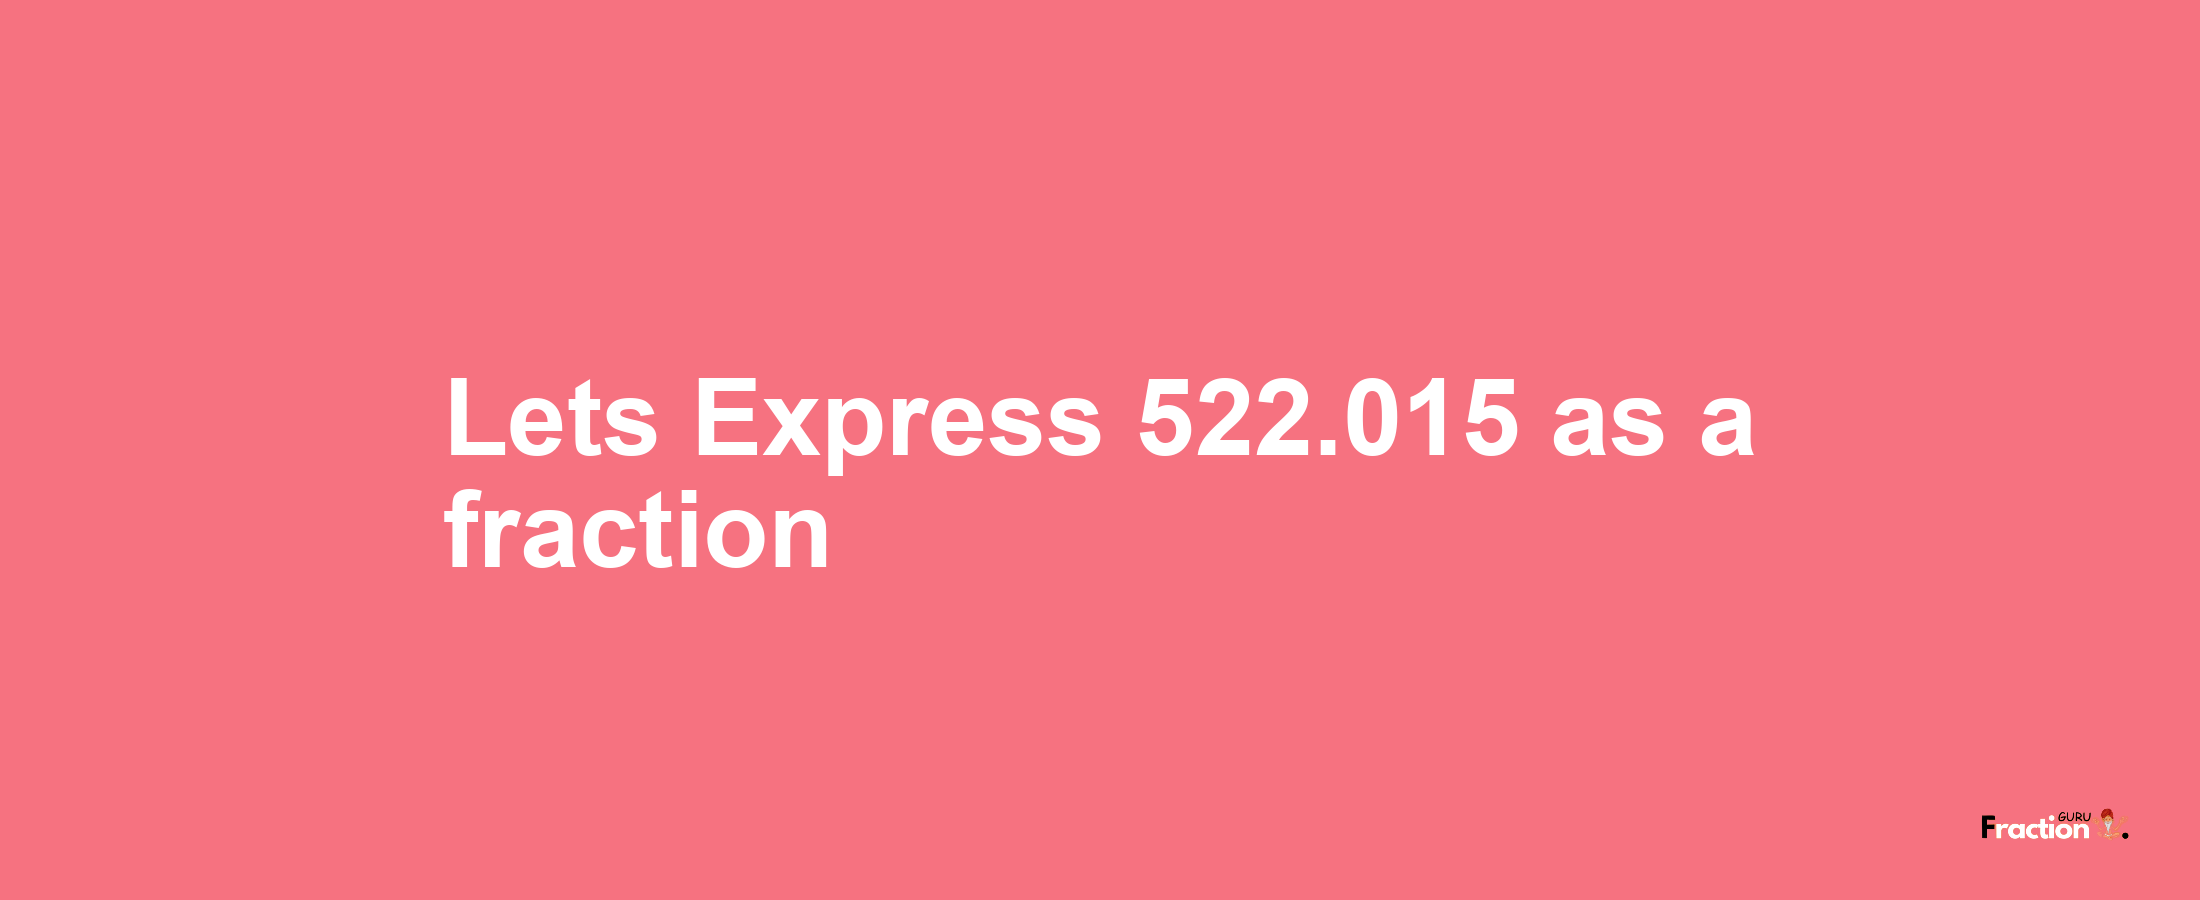 Lets Express 522.015 as afraction